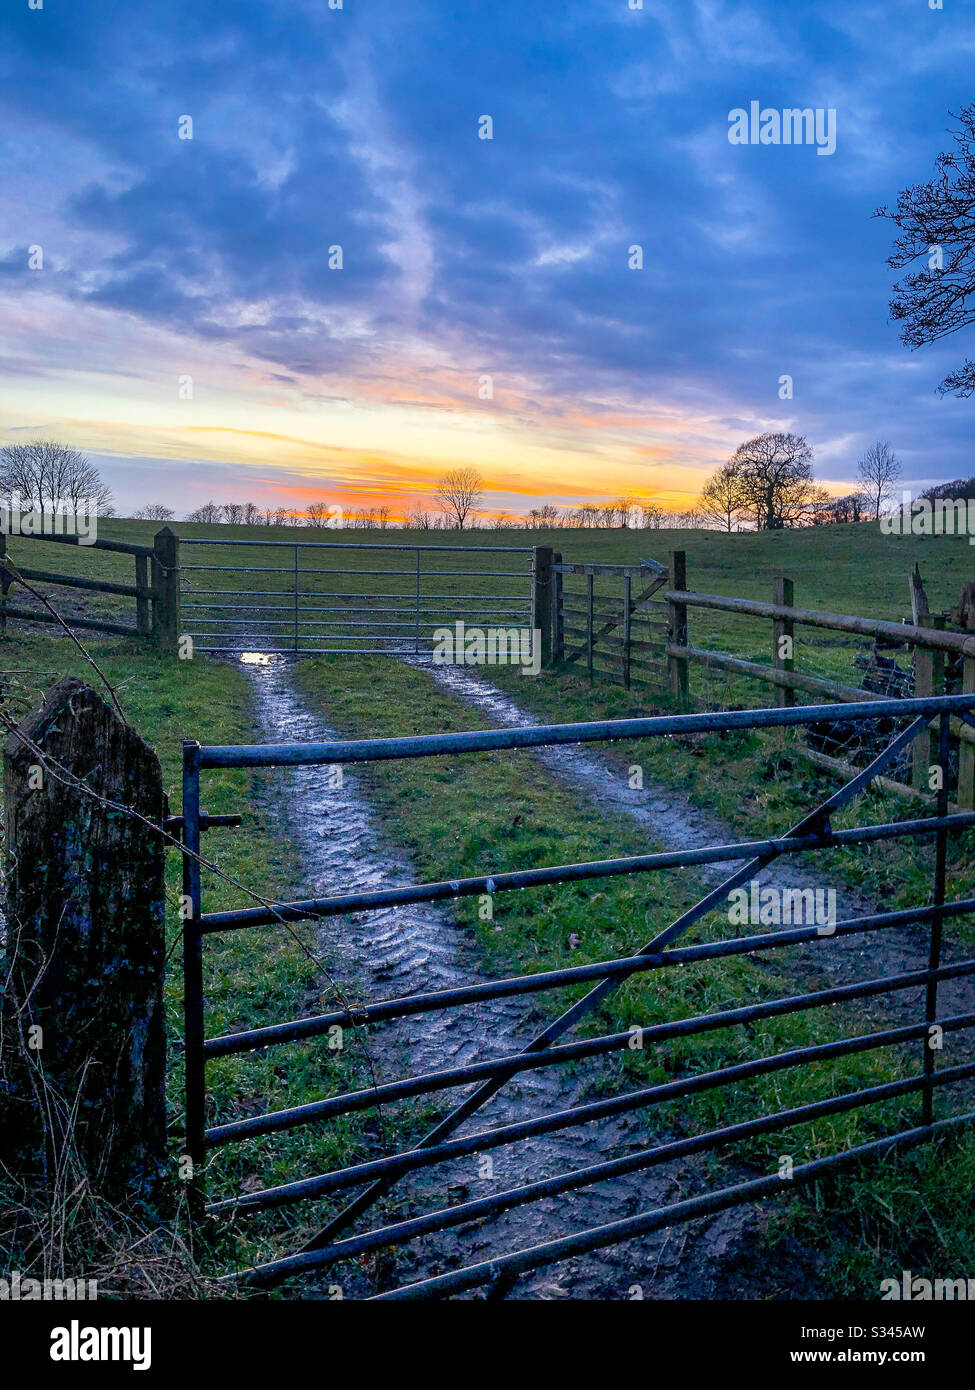 Sunset overlooking fields, gates and fences Stock Photo